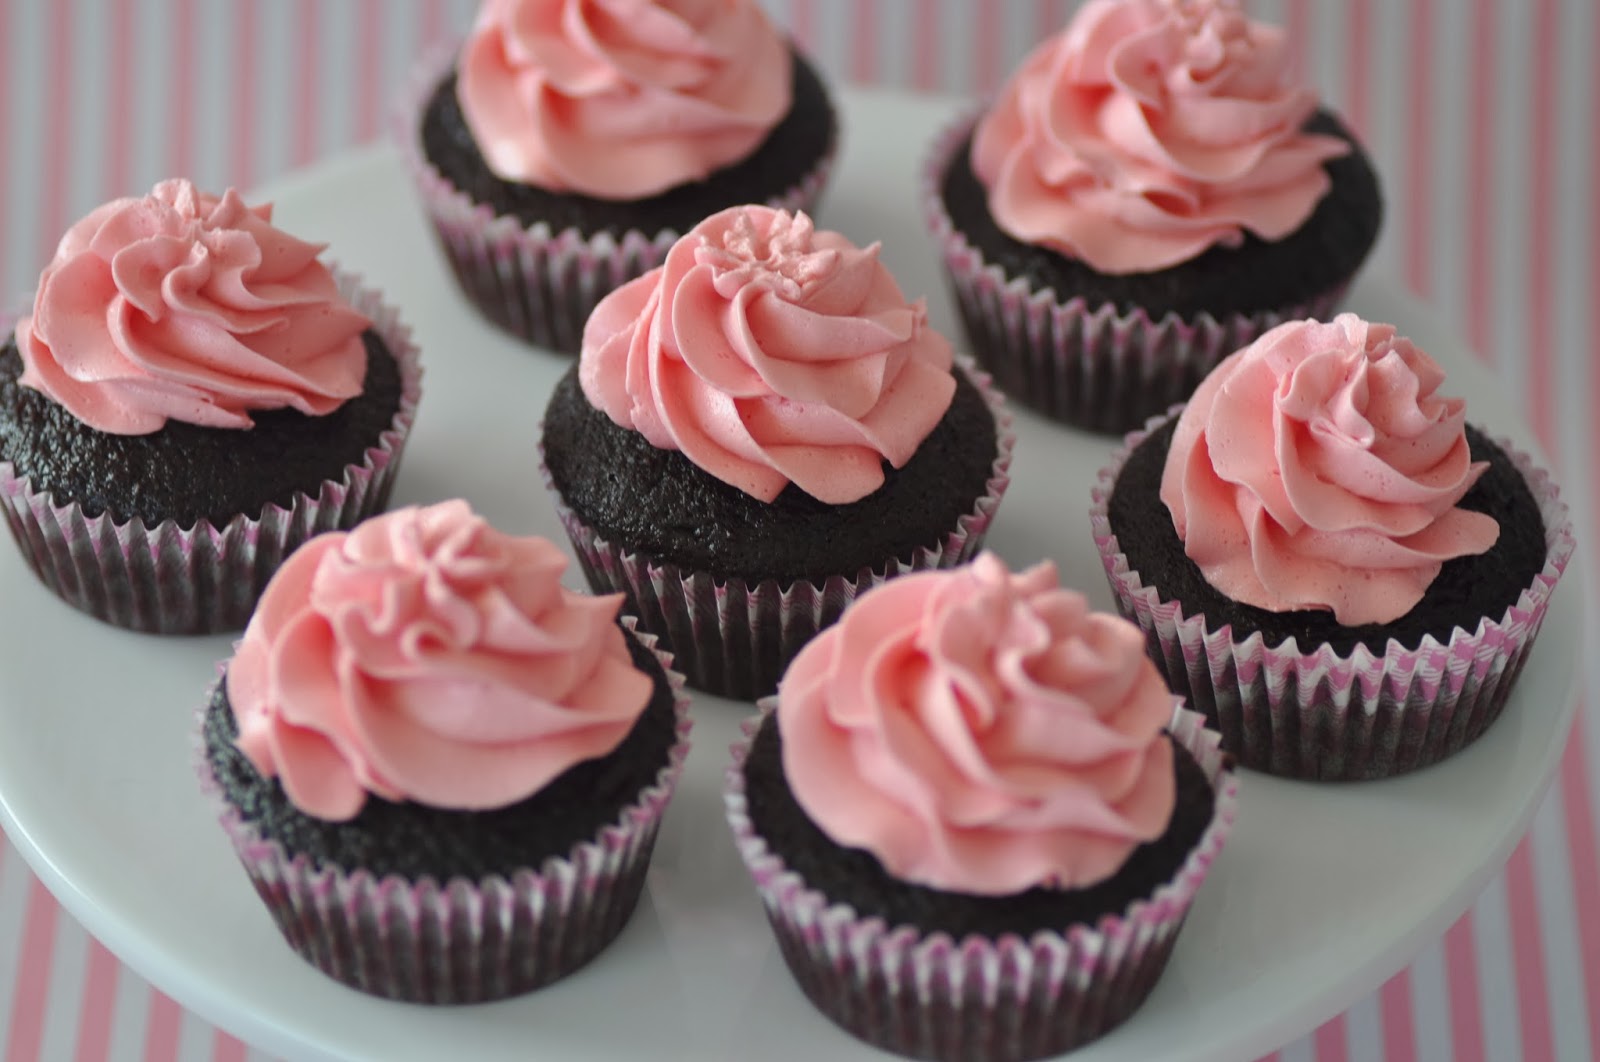 Pink Cupcakes with Chocolate Icing